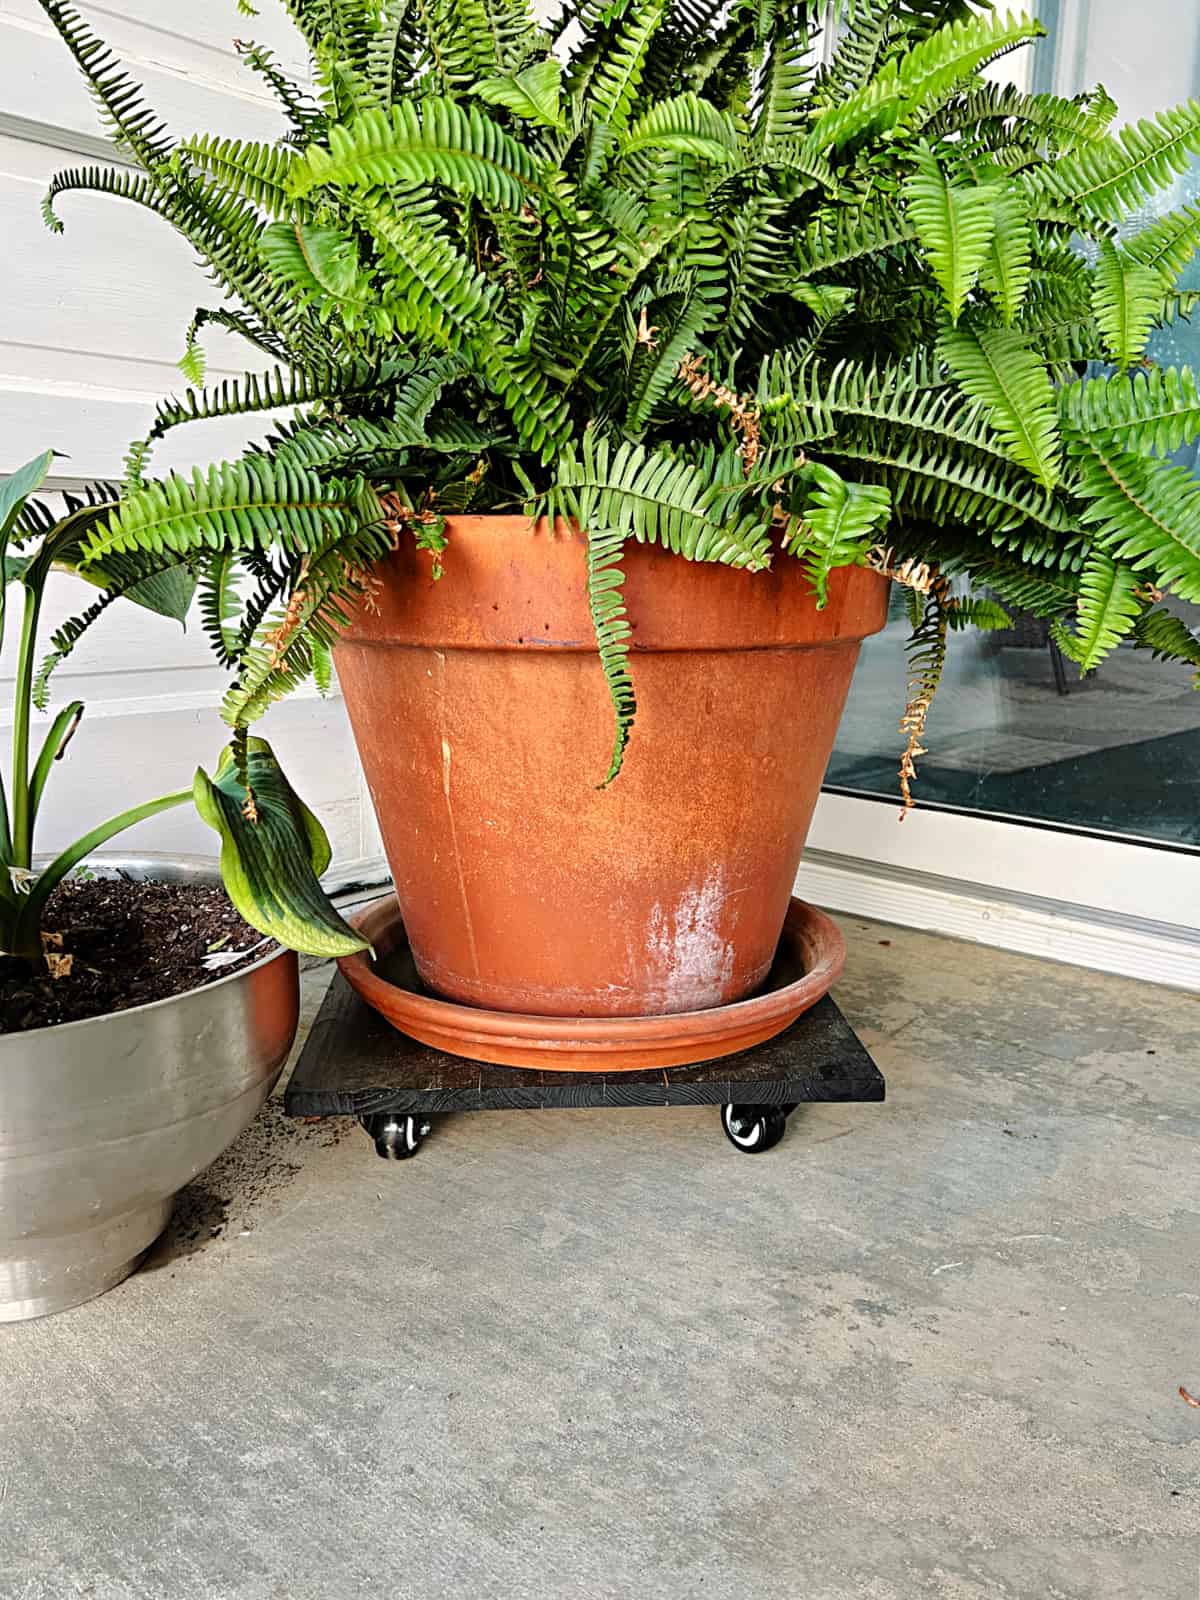 planted fern sitting on DIY rolling plant stand